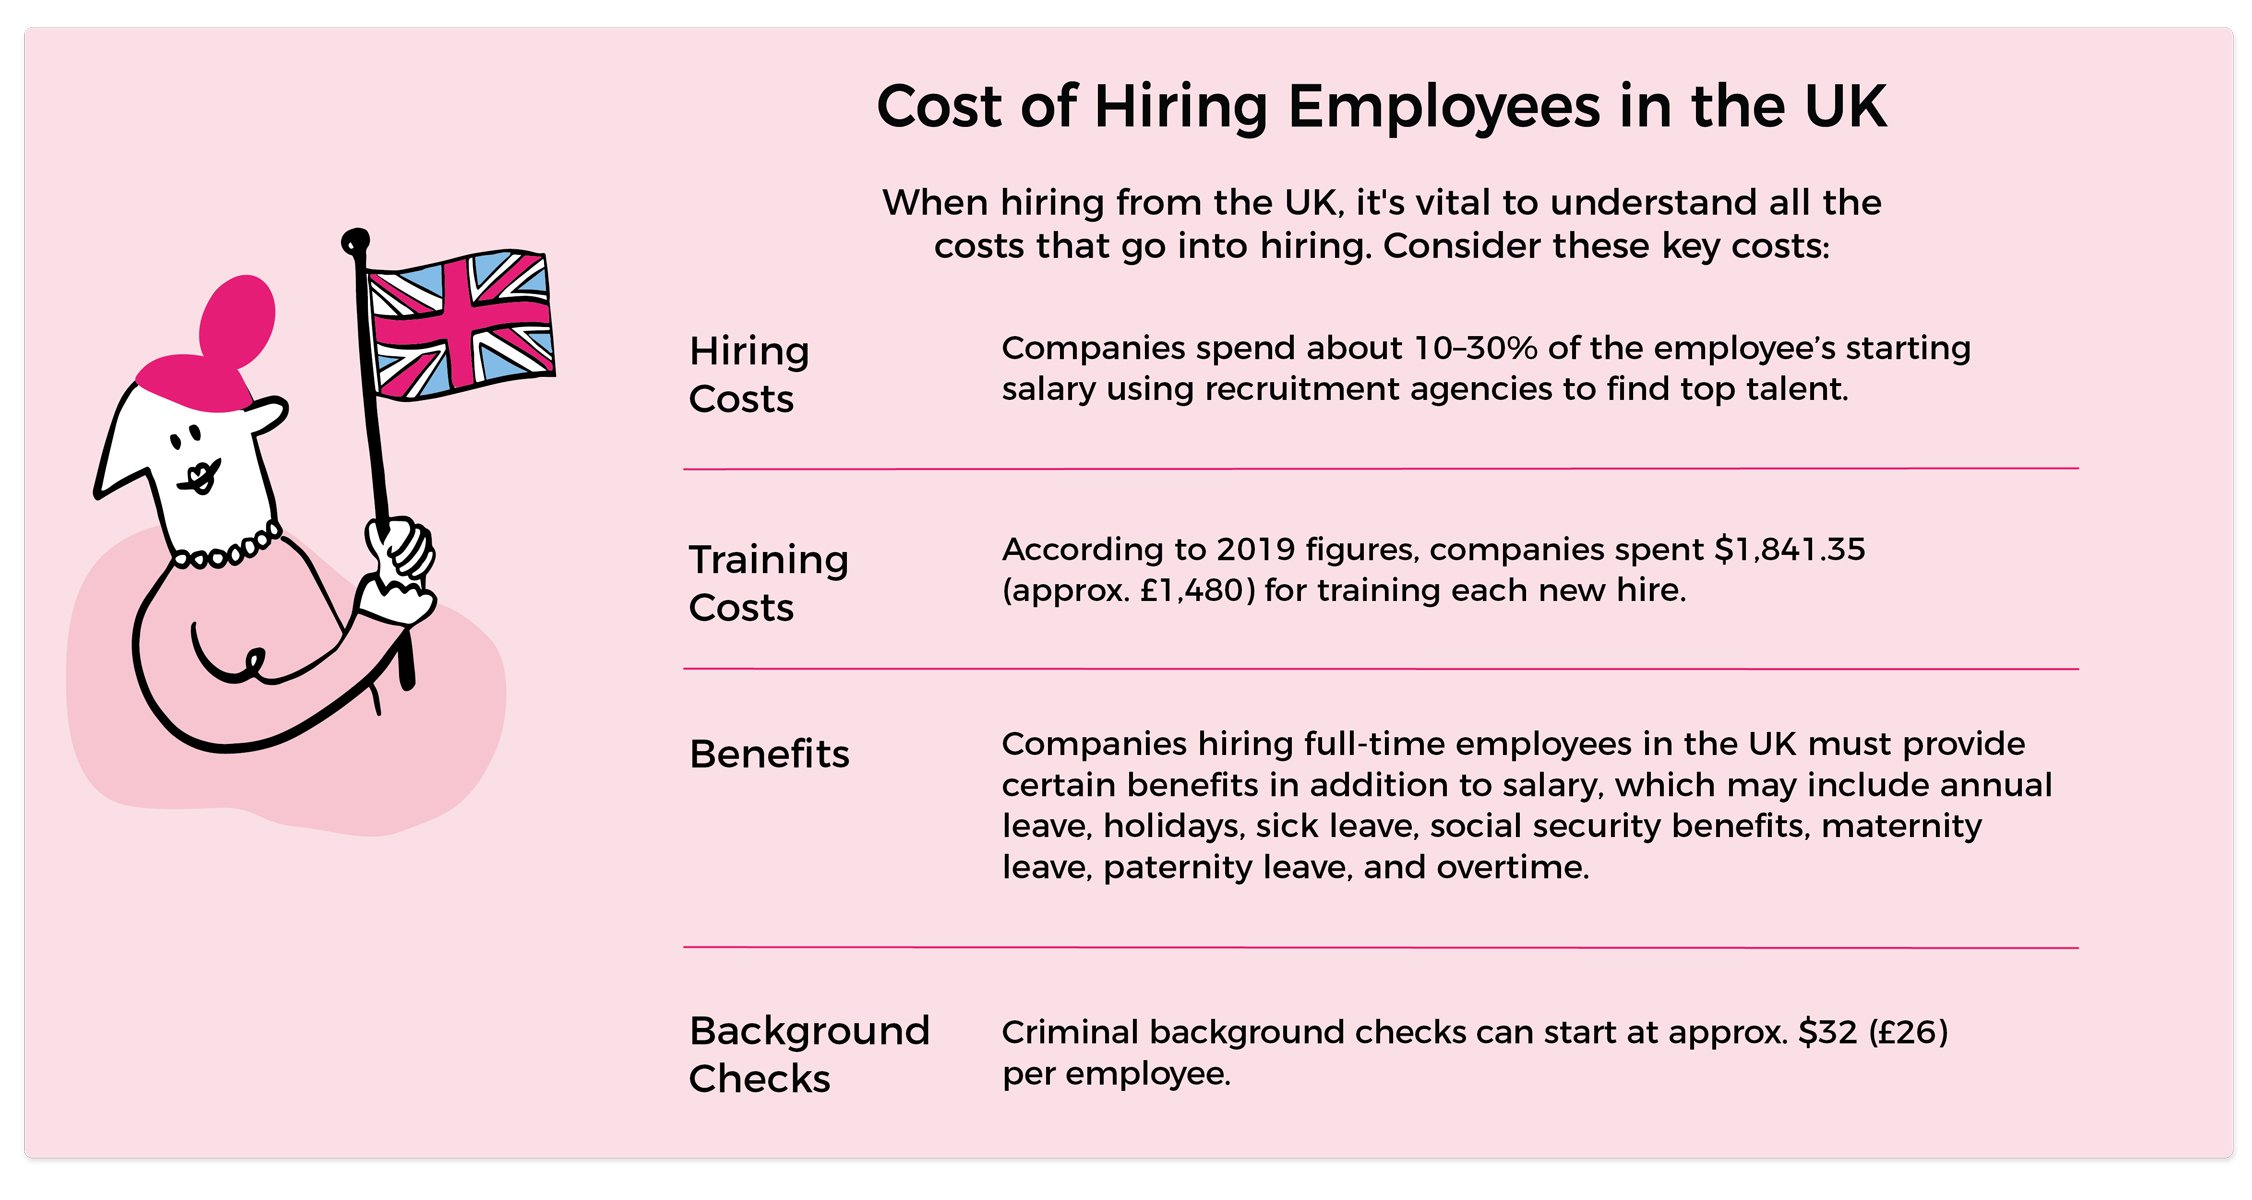 Cost of Hiring Employees in the UK includes hiring costs, training costs, benefits, and background checks.